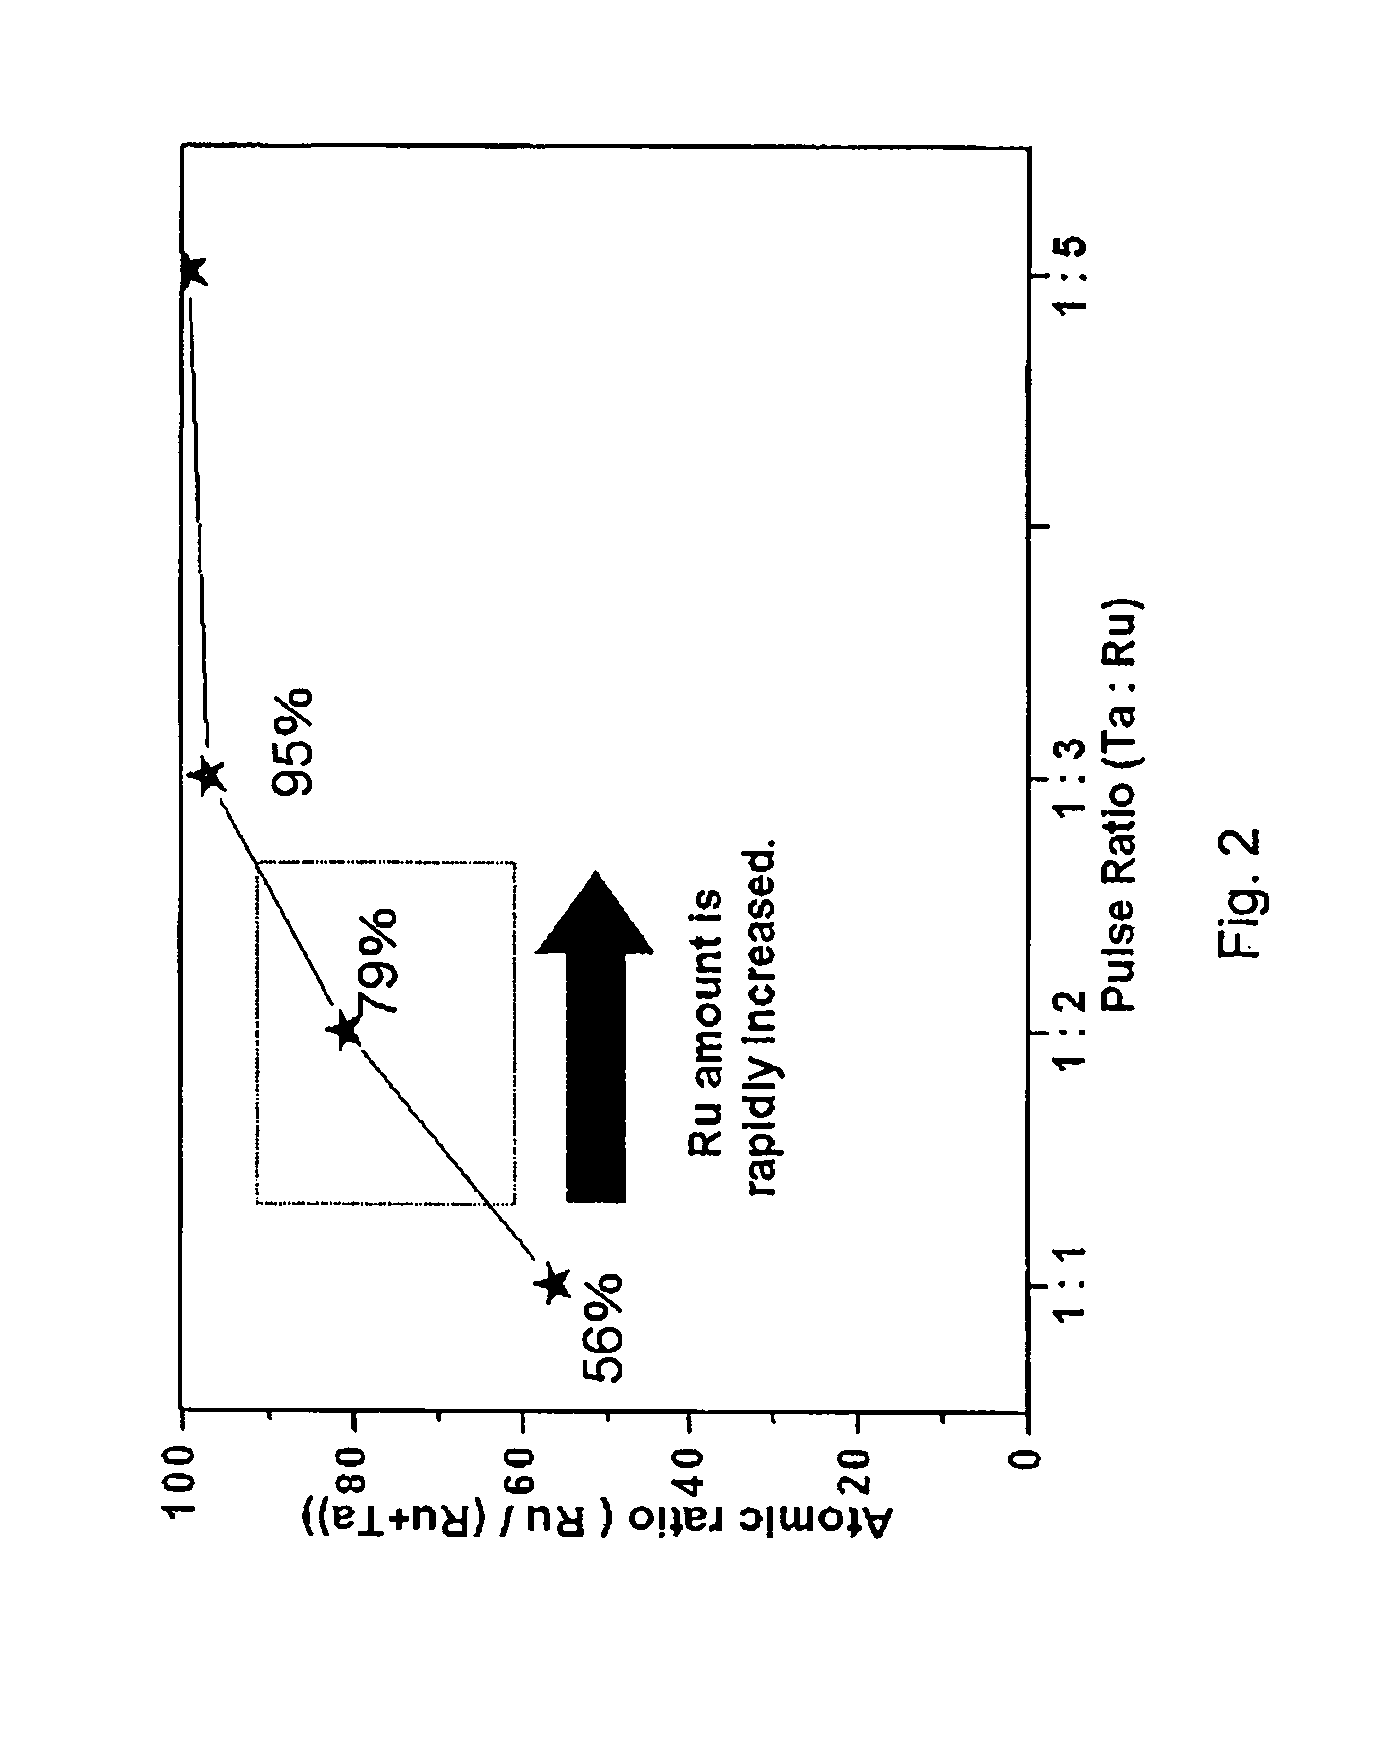 Ruthenium alloy film for copper interconnects